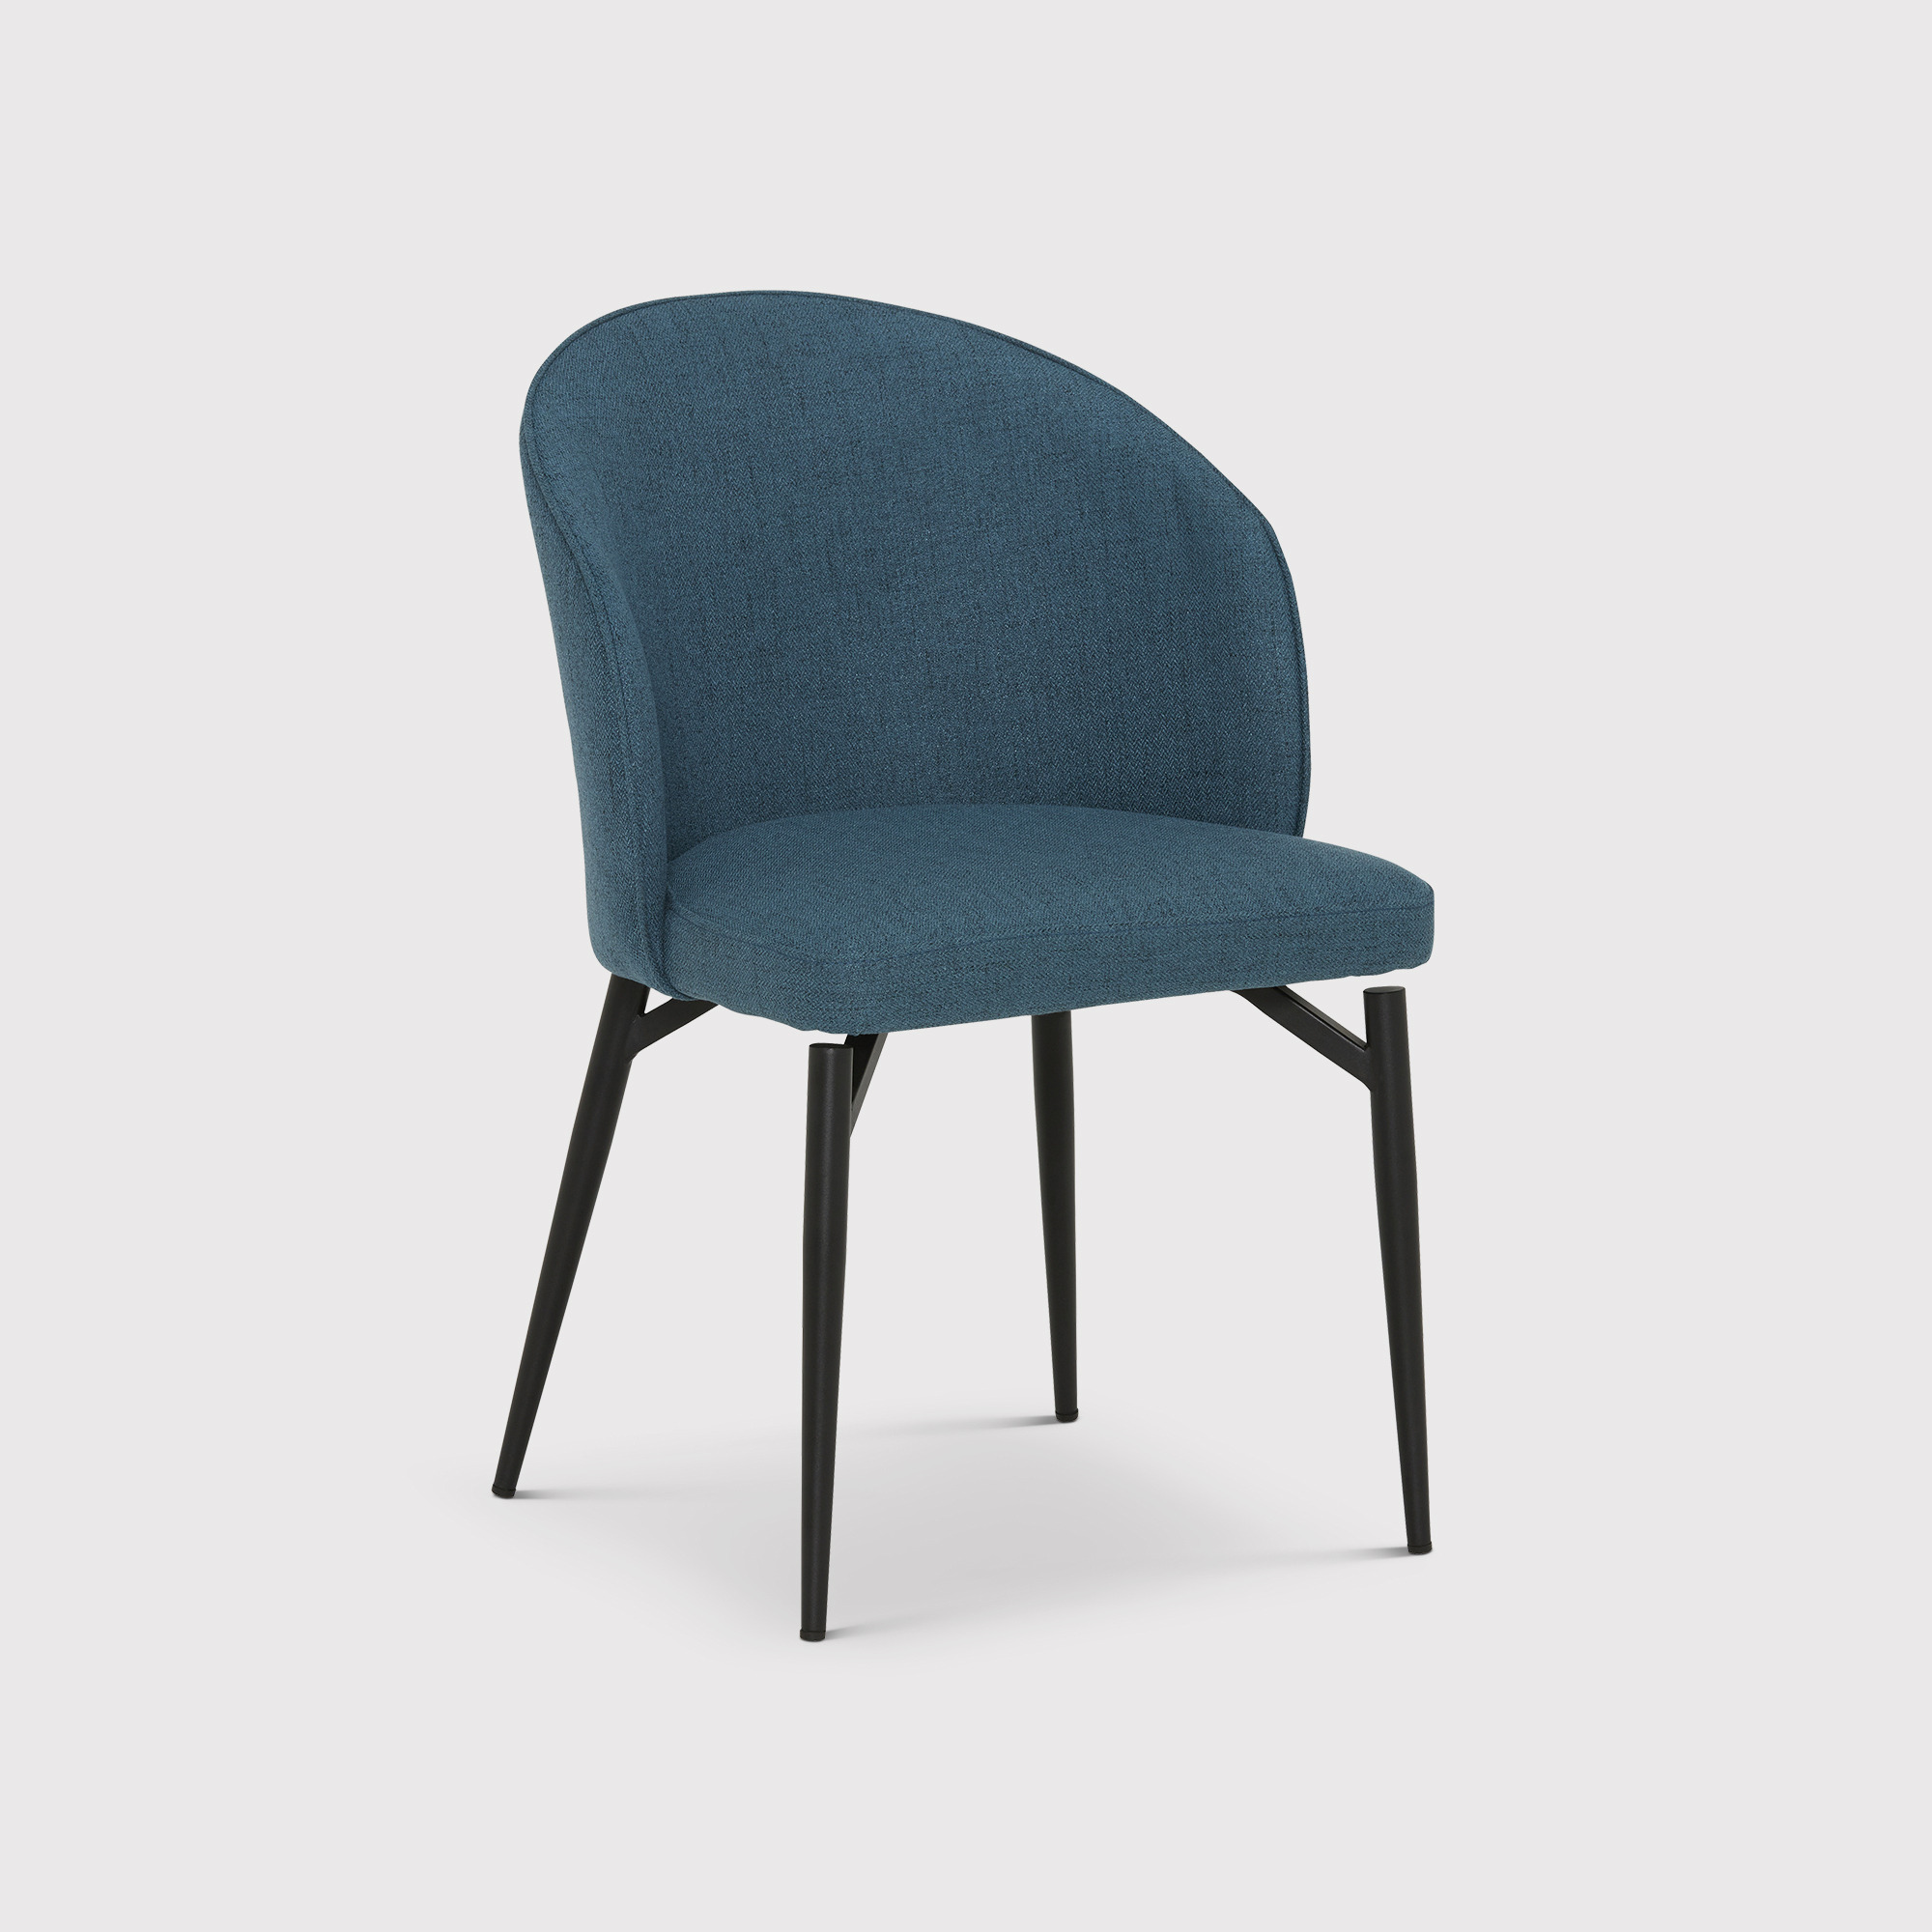 Lauri Dining Chair, Blue Fabric - Barker & Stonehouse - image 1